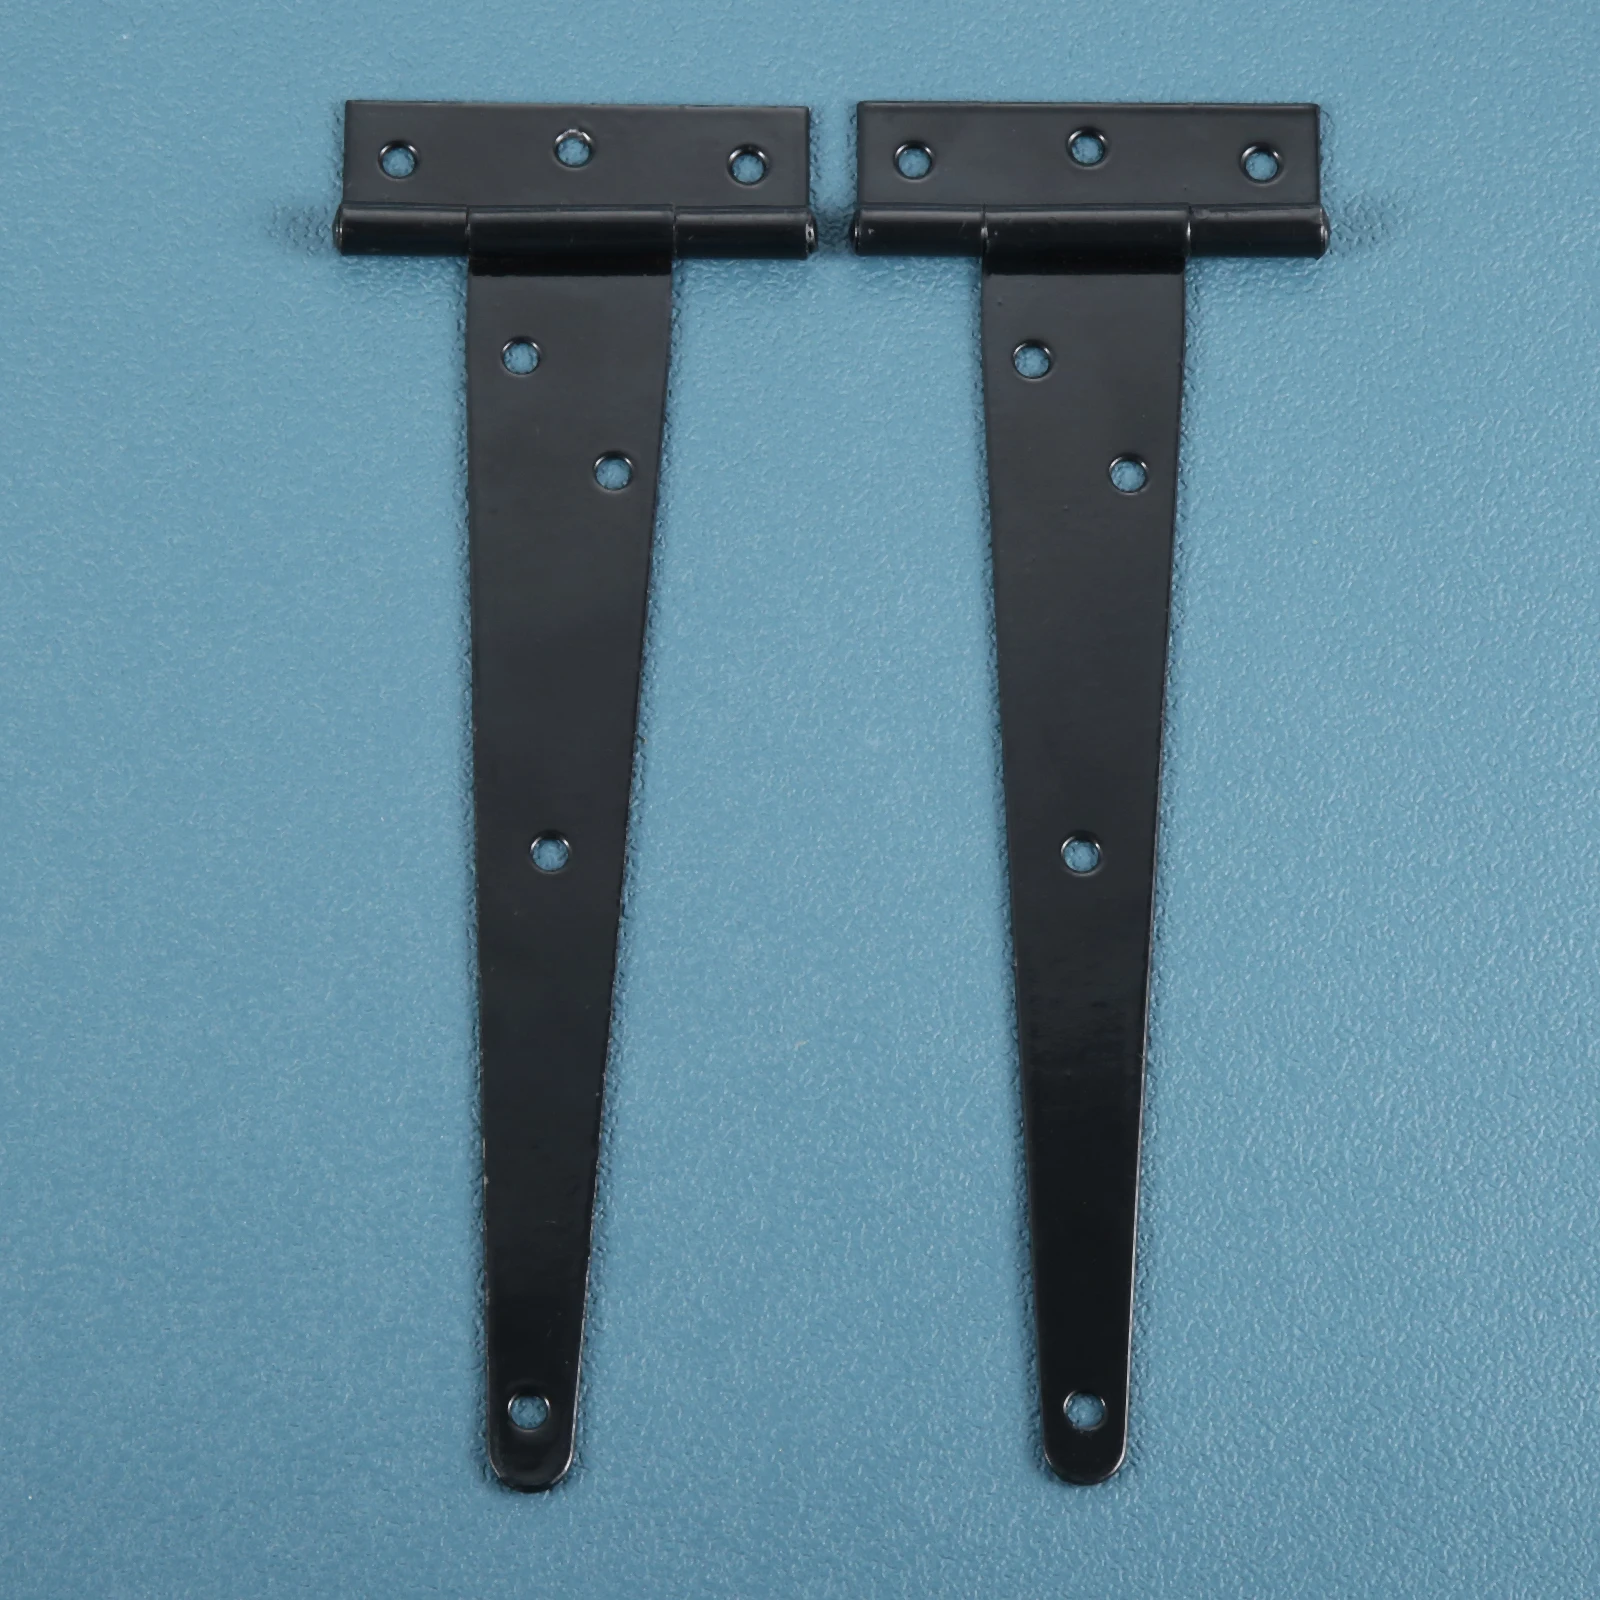 2Pcs T Shape Heavy Duty Gate Hinge with Screws 2/3/4/5/6/8/10/12 Inch T-Strap Shed Hinge Furniture Wooden Door Barn Gates Hinges